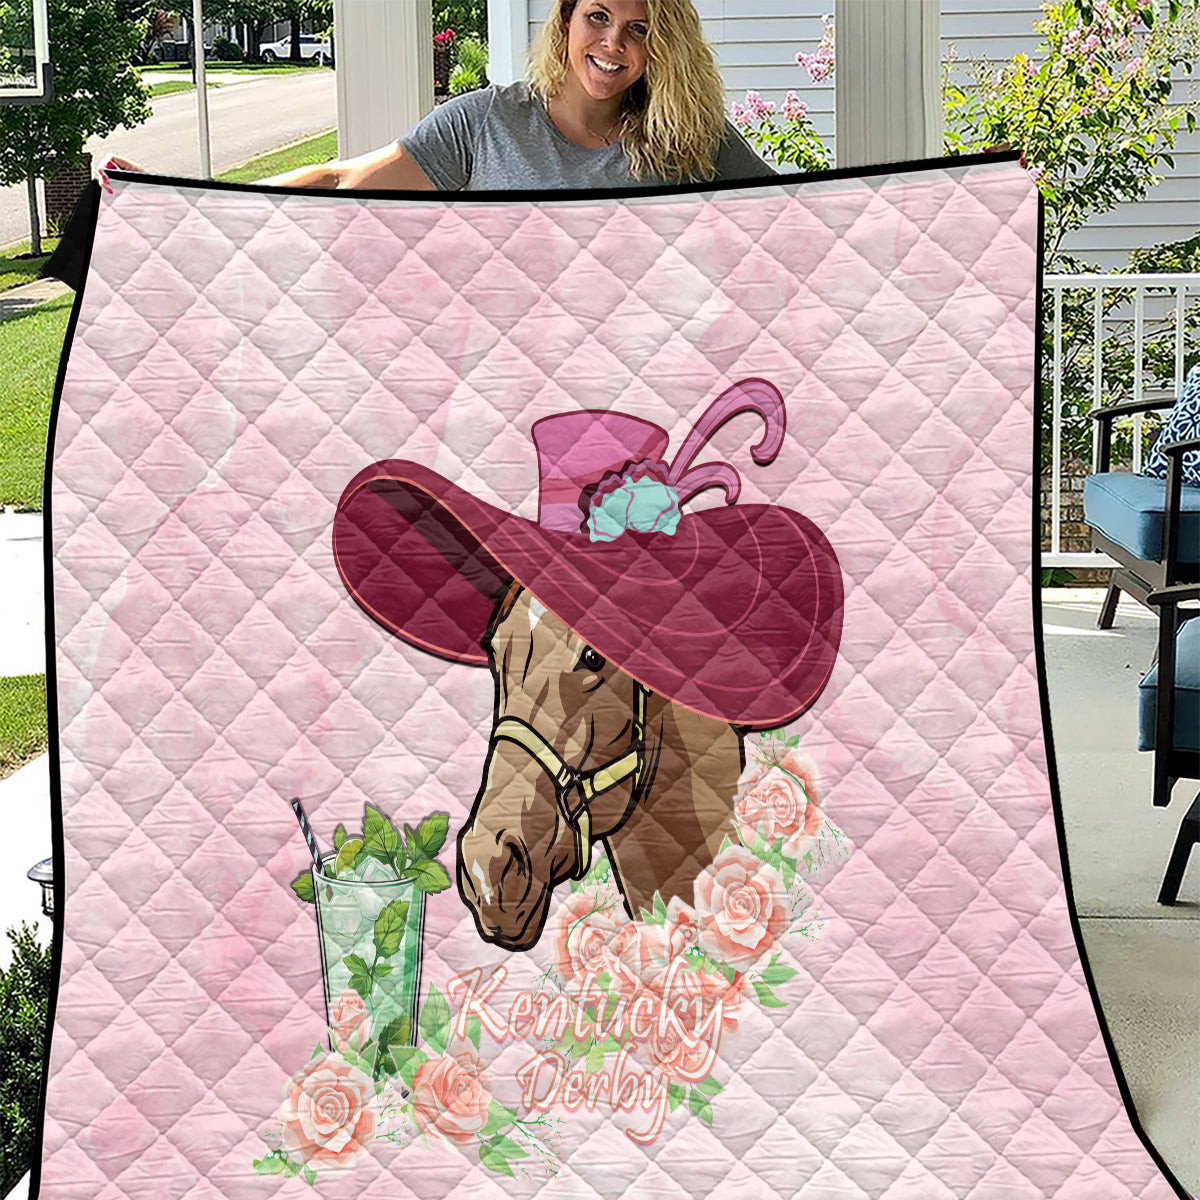 Kentucky Horse Racing Quilt Derby Mint Julep With Roses